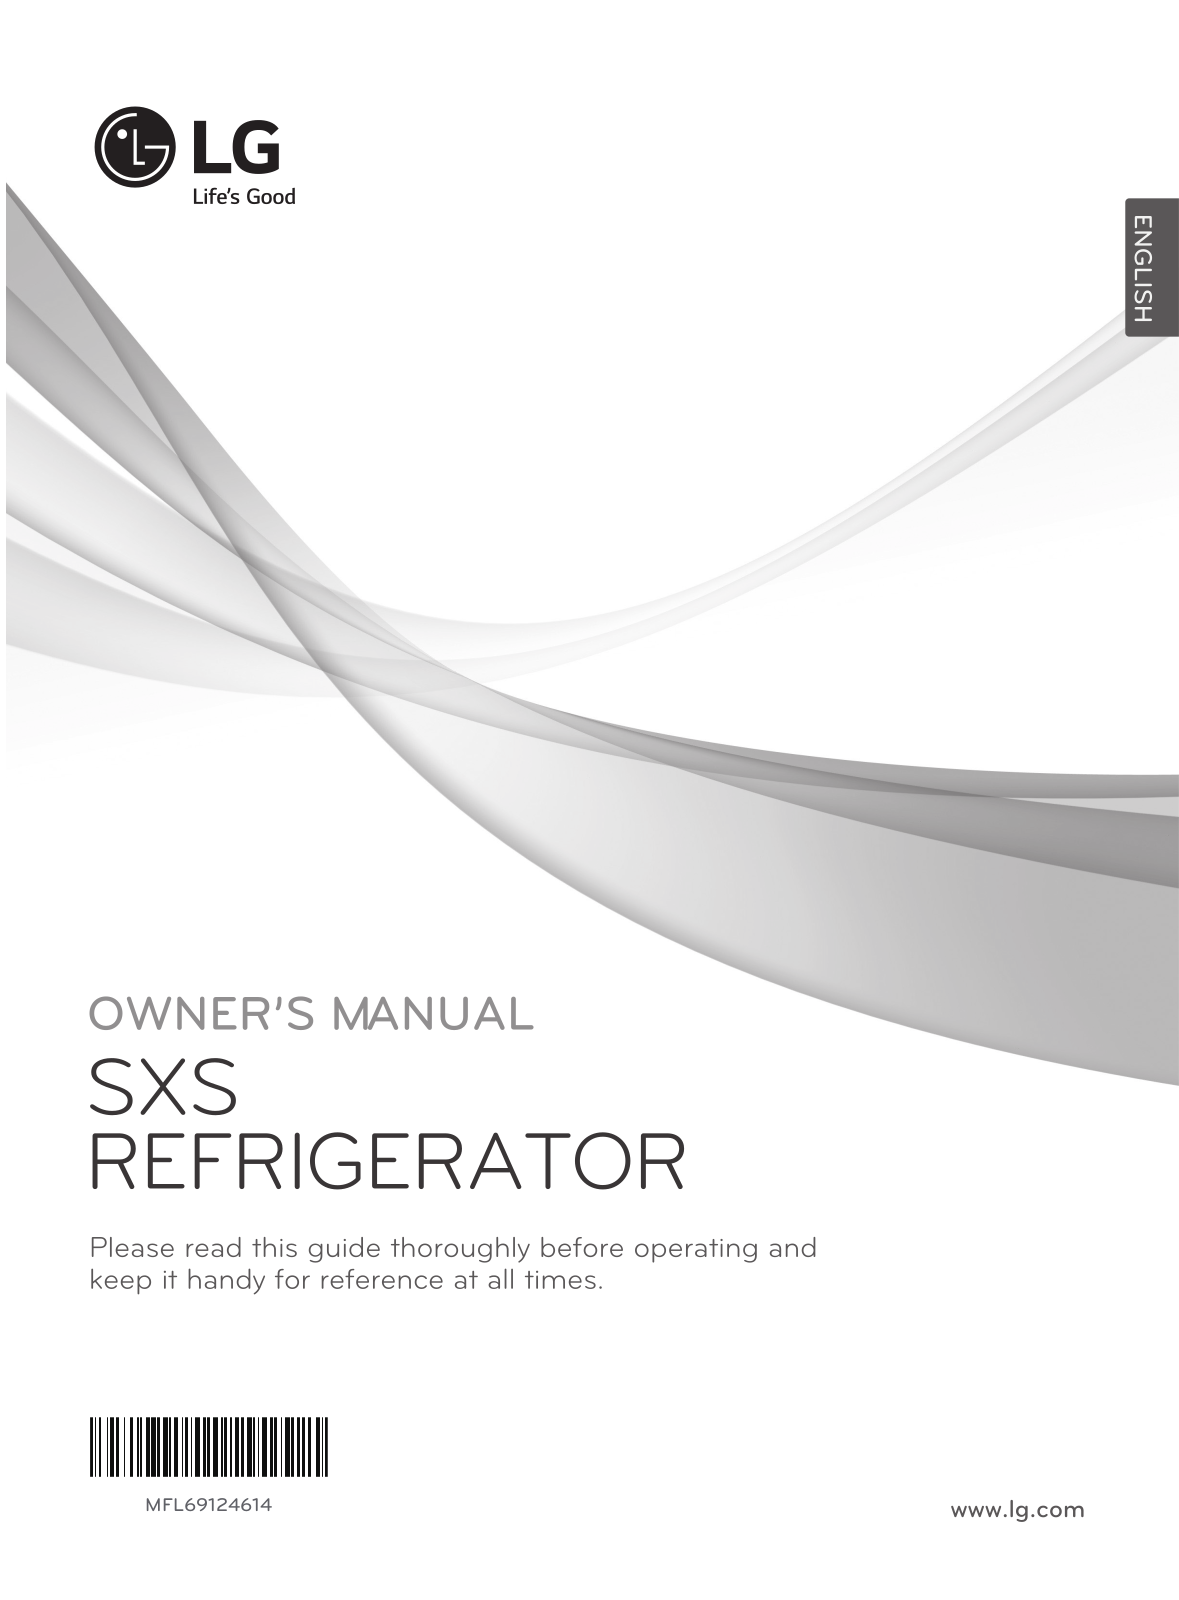 LG GS-M6261NS Owner’s Manual